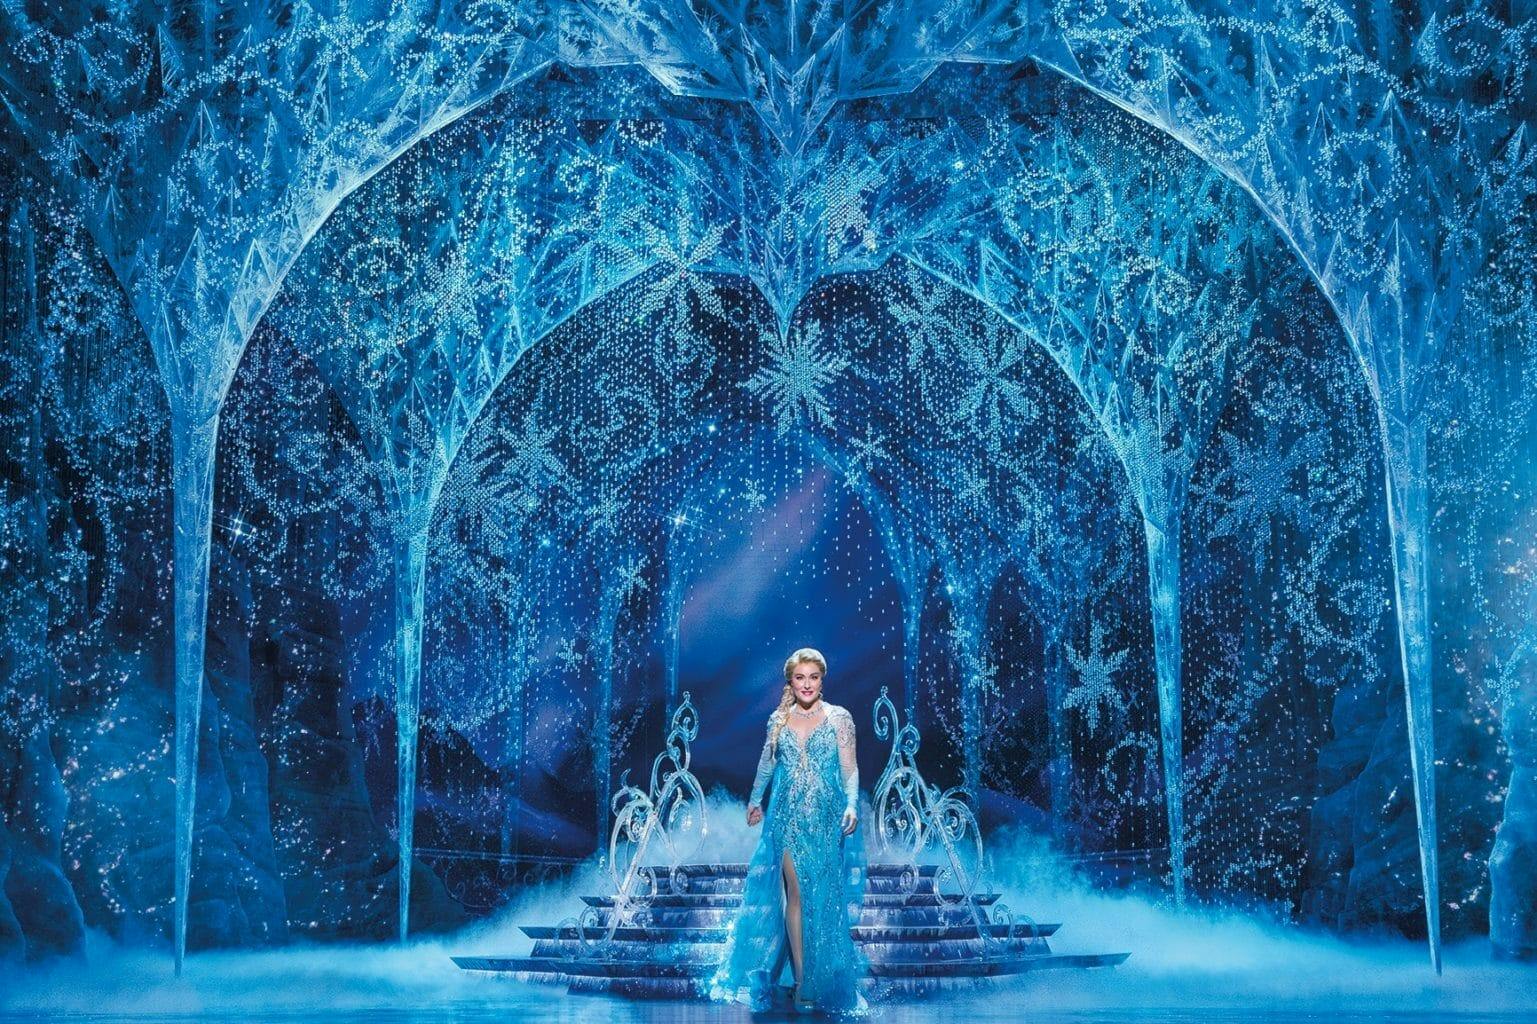 Disney's Frozen Is Coming To Perth!